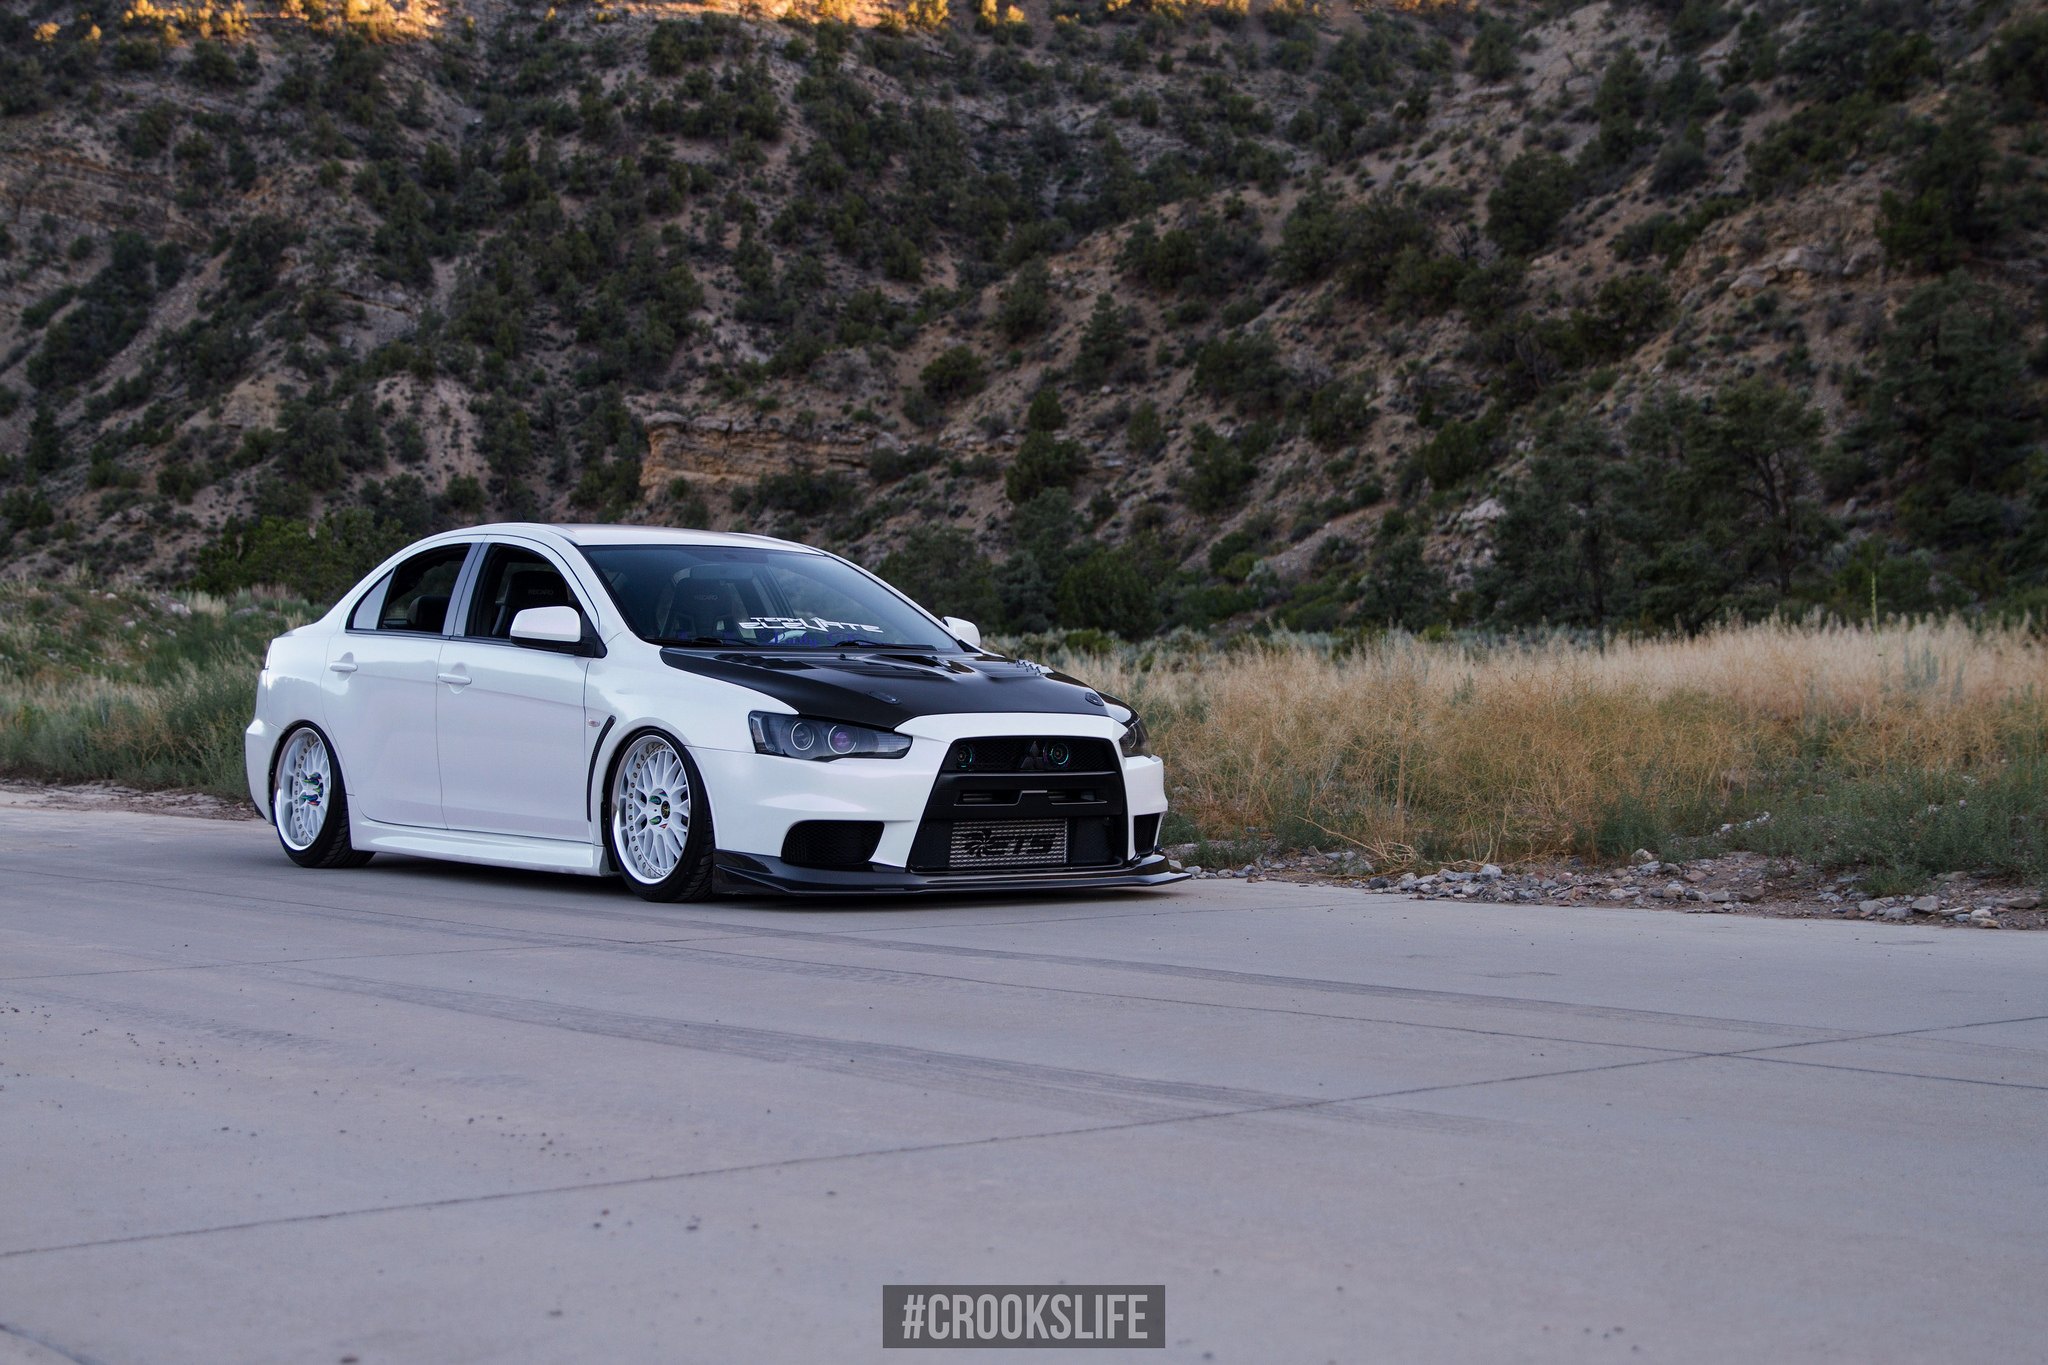 Custom Hood with Air Vents on Mitsubishi Lancer Evolution - Photo by Jimmy Crook